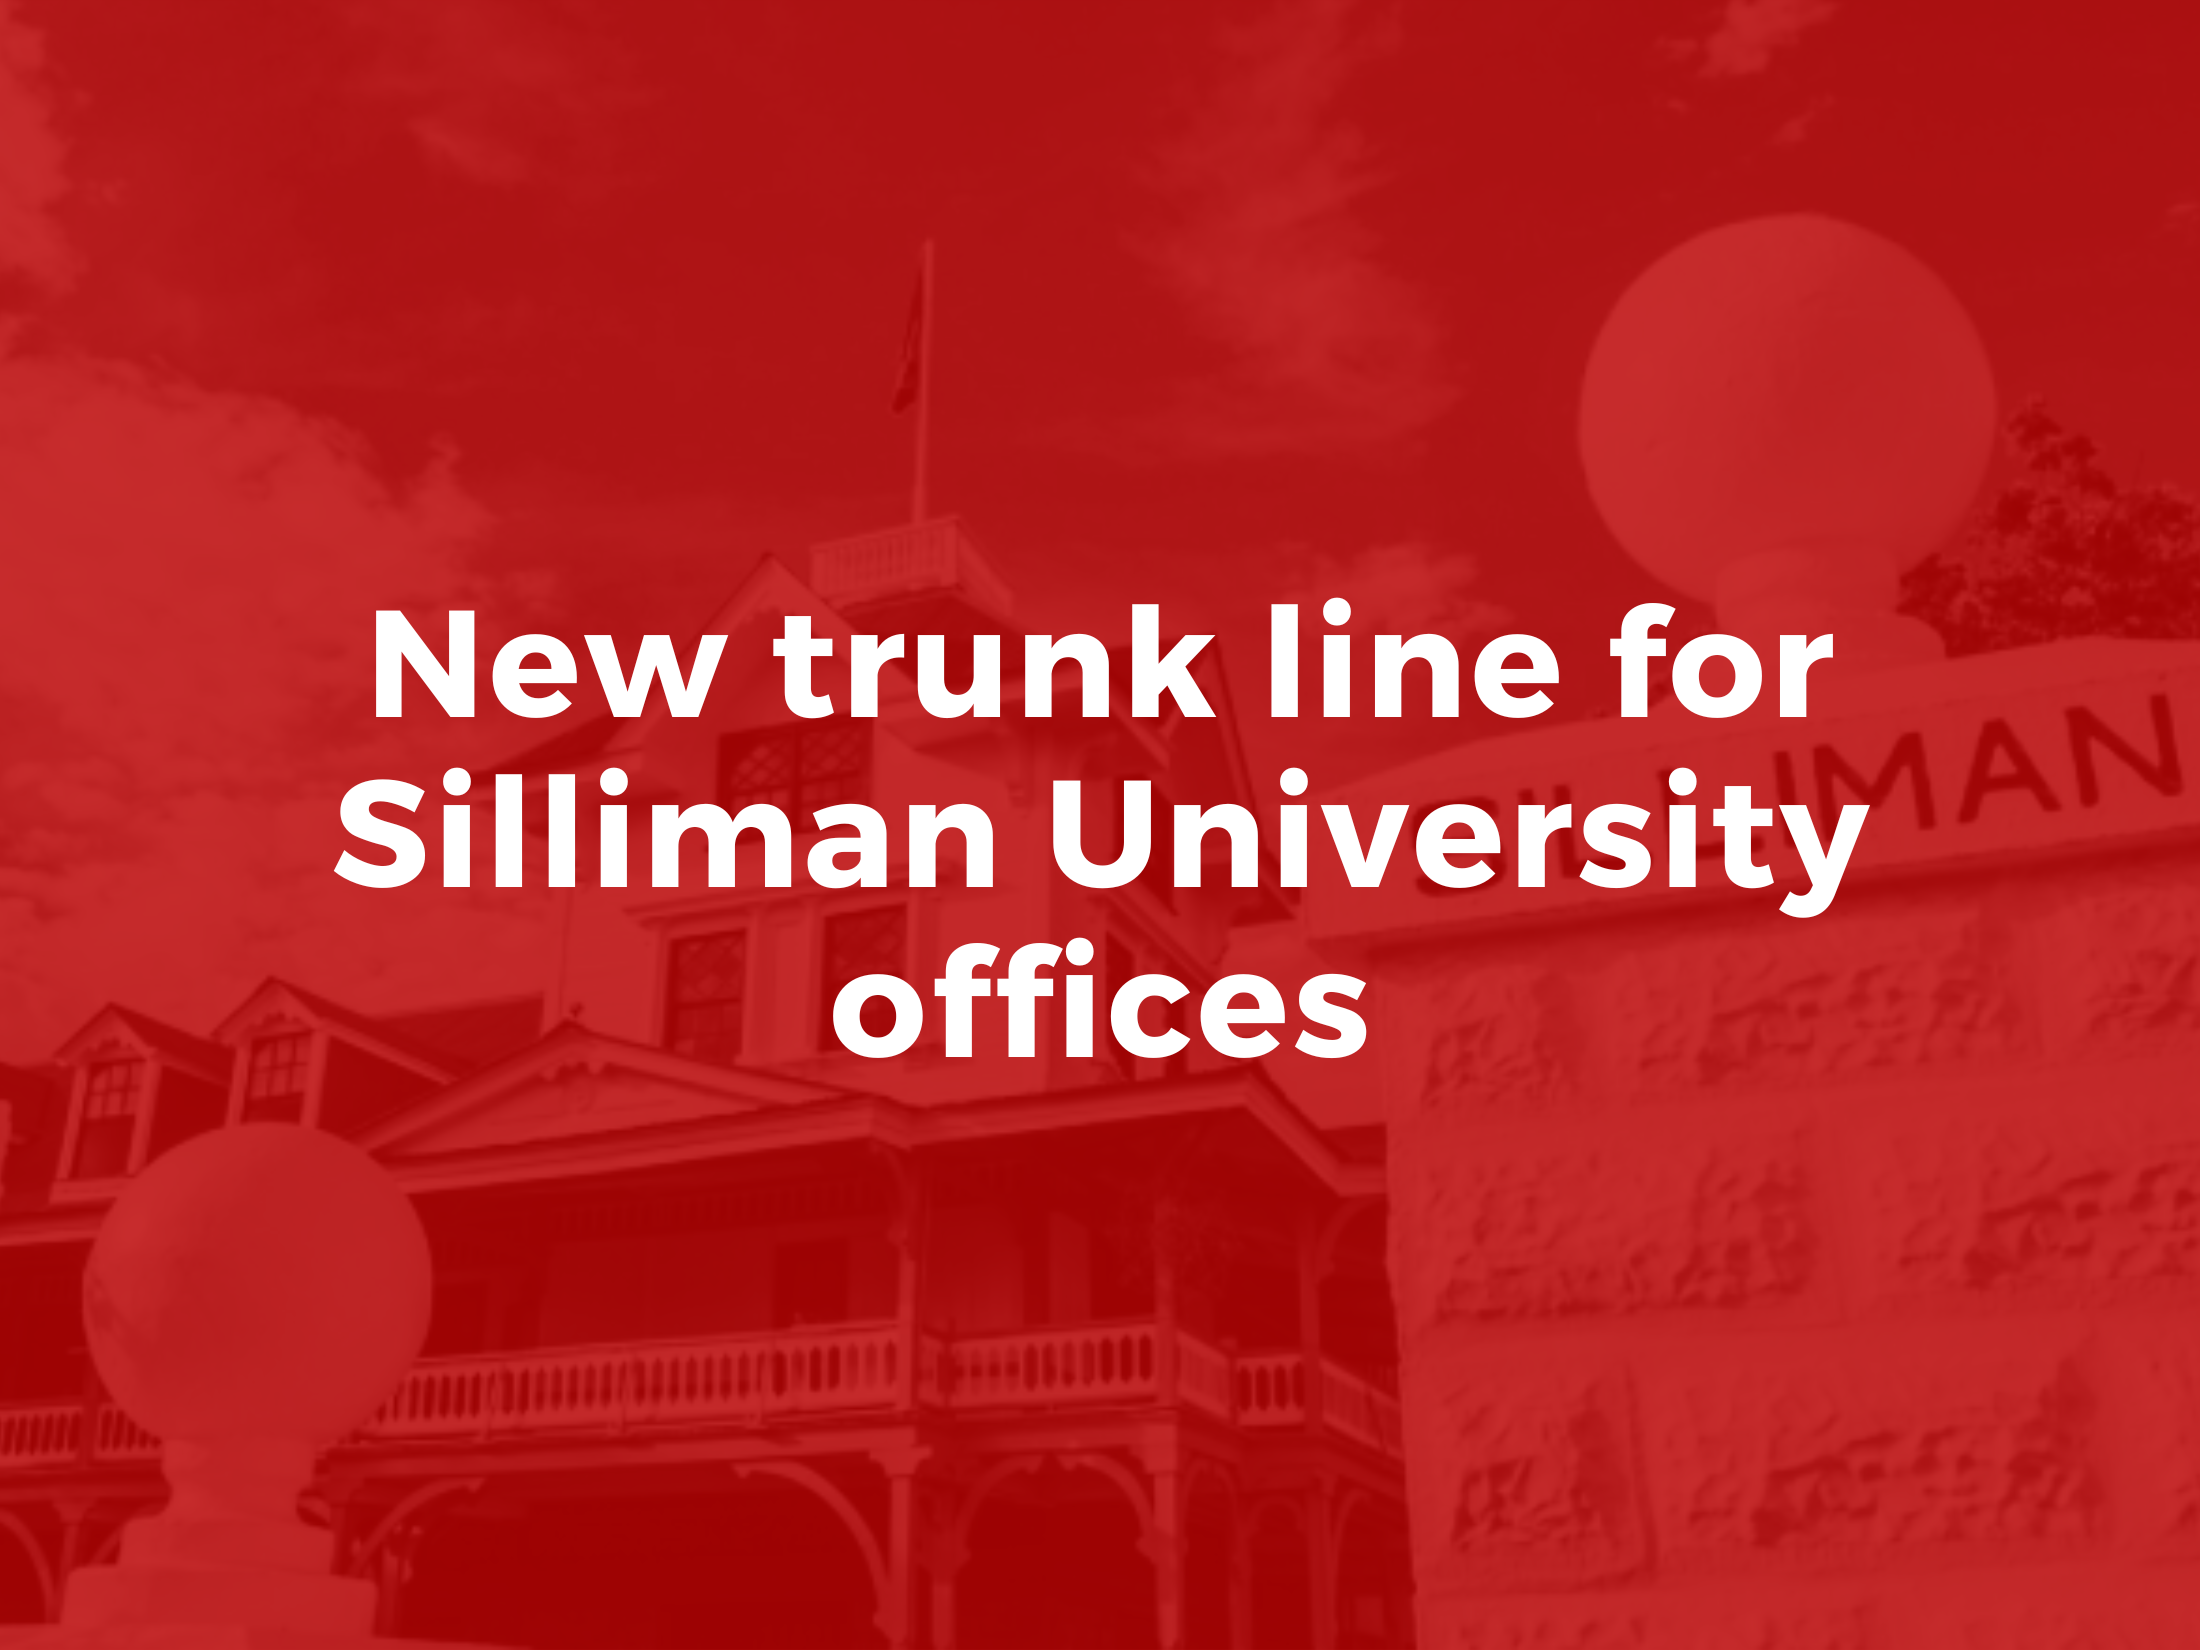 Announcement: New trunk line for Silliman University offices